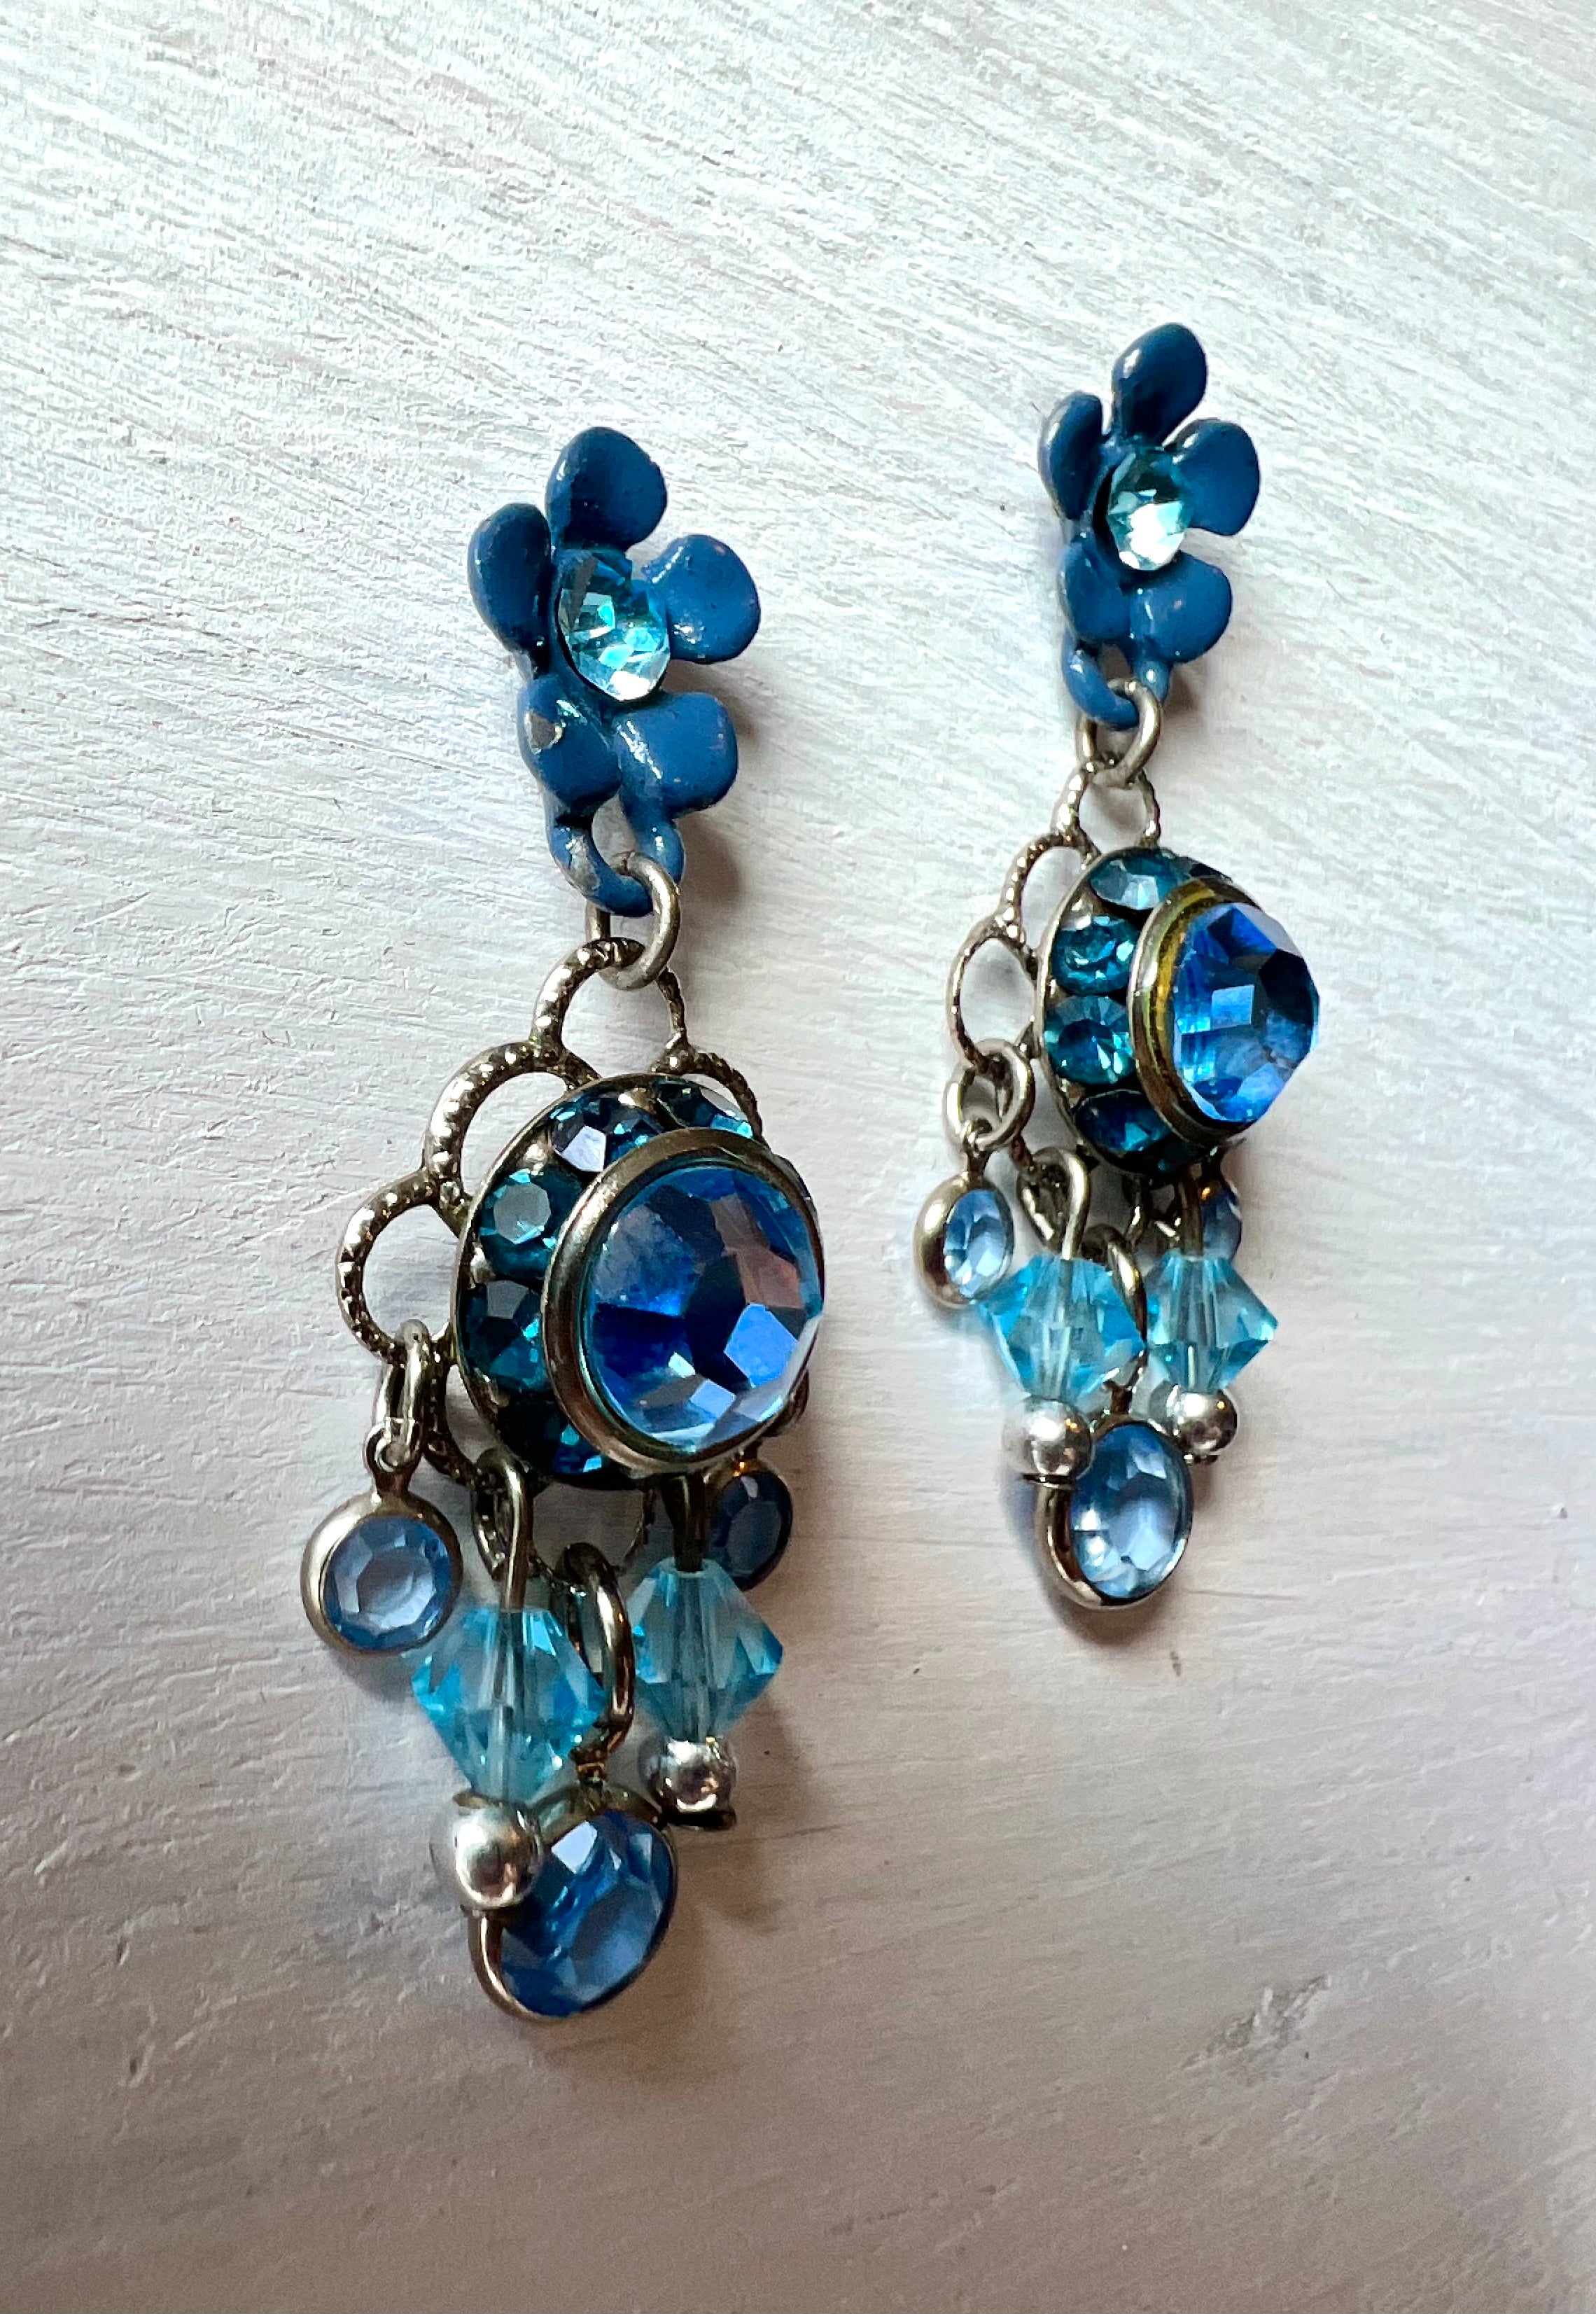 RGS-E044: Handcrafted Crystal Earrings